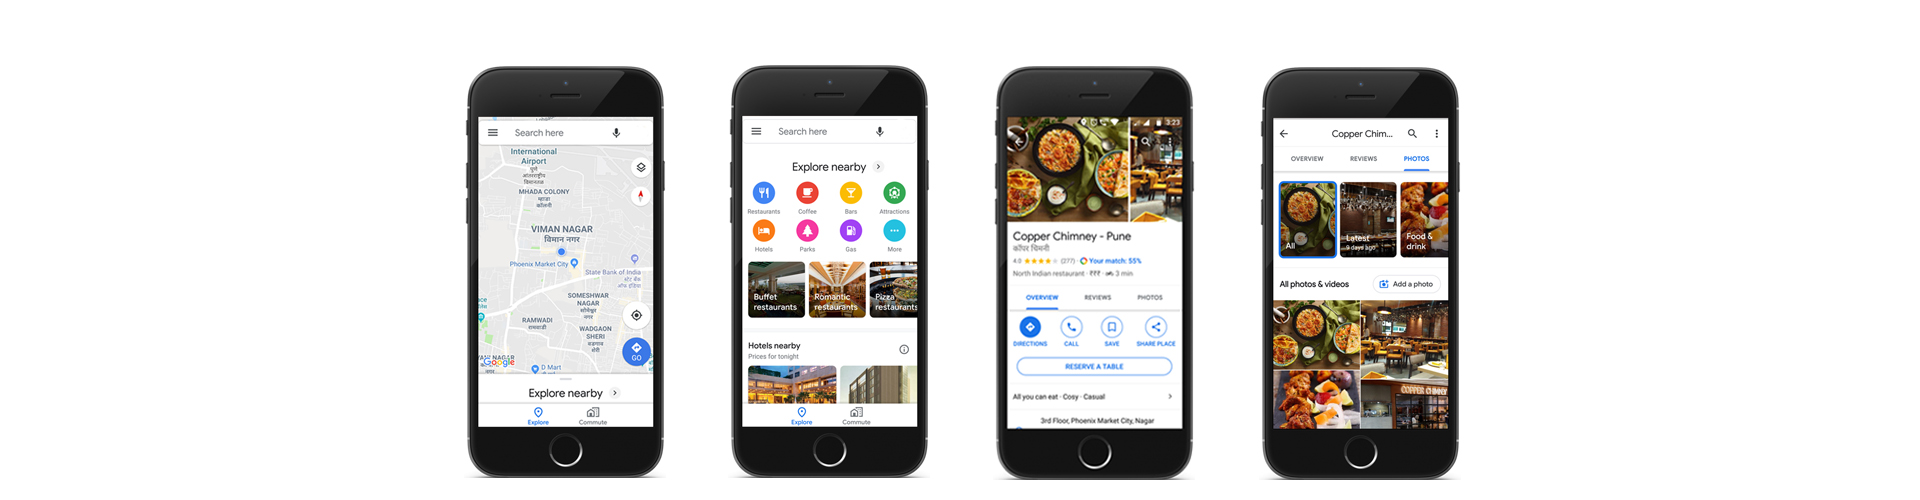 Google Maps help you discover popular dishes